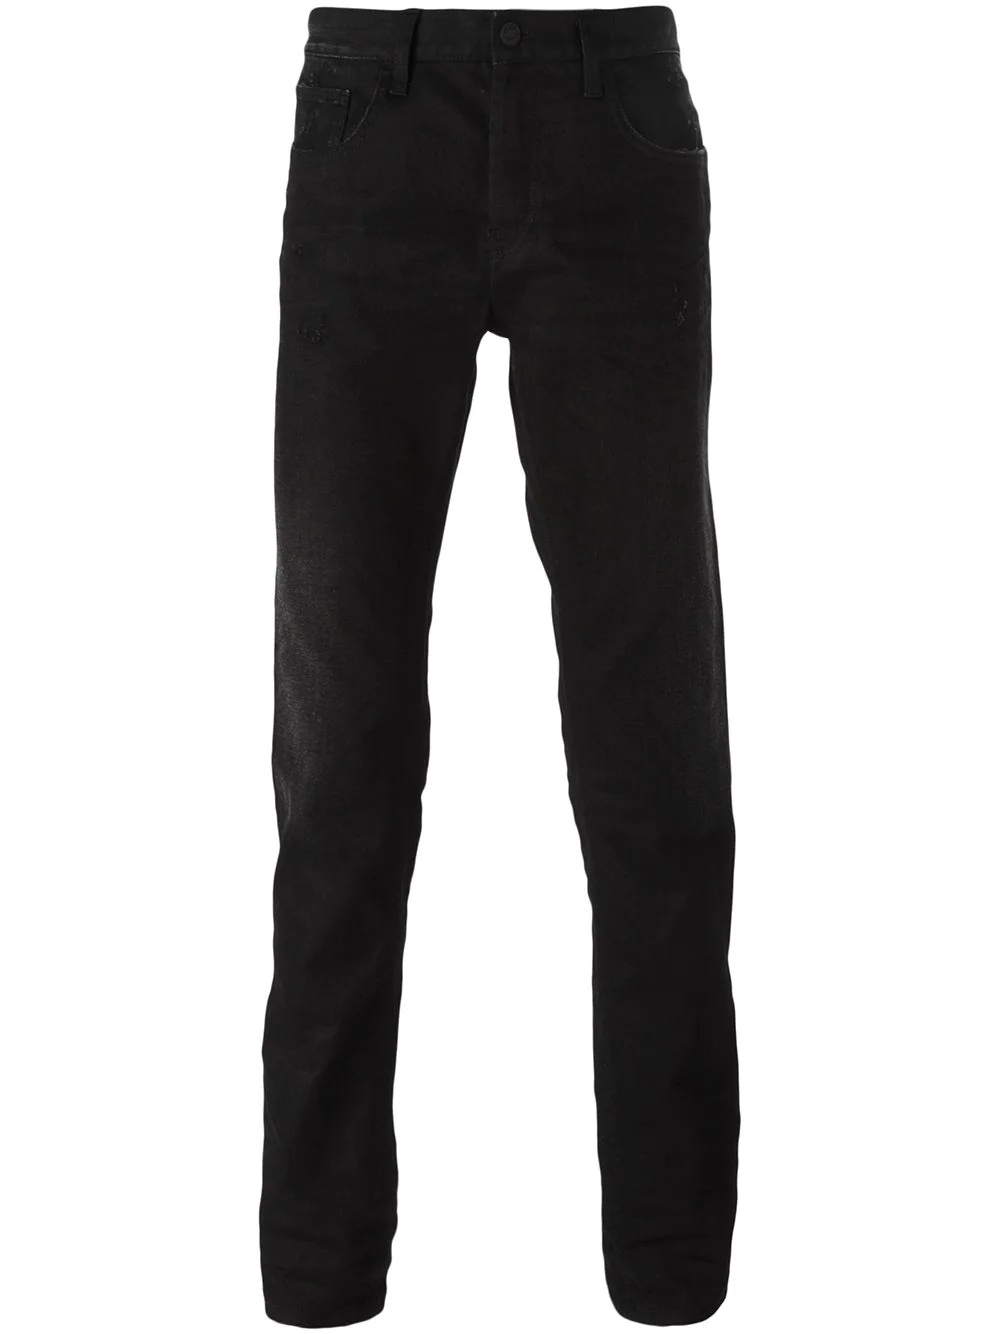 stonewashed classic jeans - 1